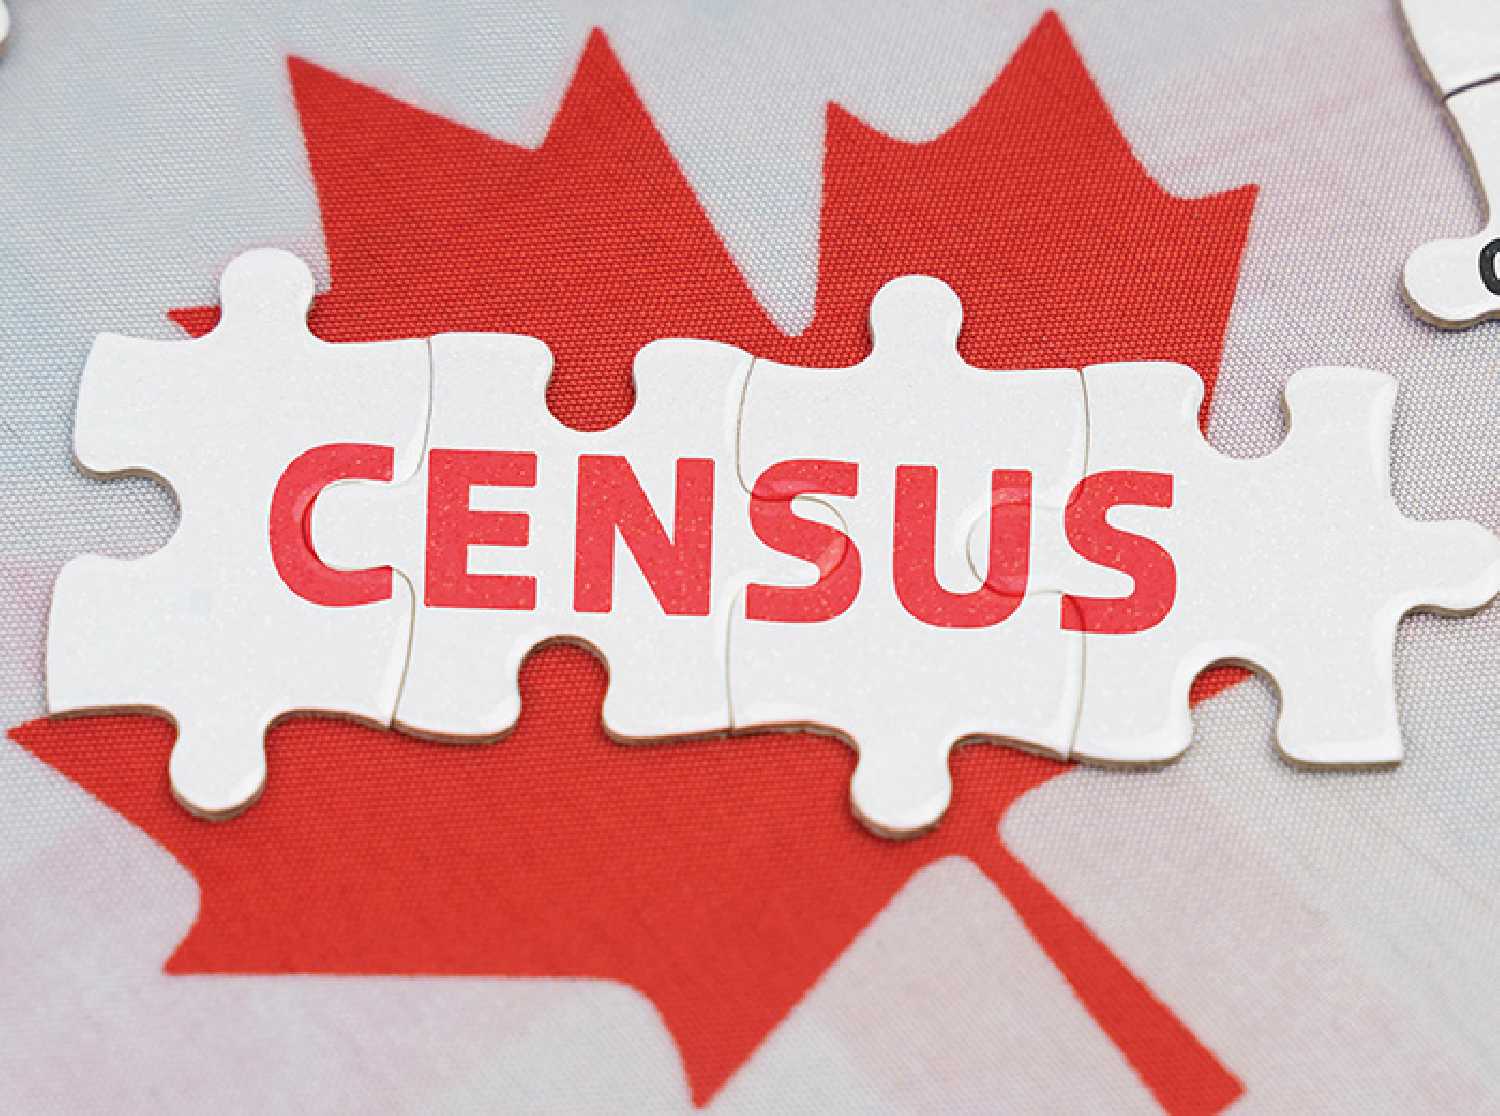 Within the province of Saskatchewan there were 37 communities that received a revision for their 2021 Population and dwelling count amendments Census.